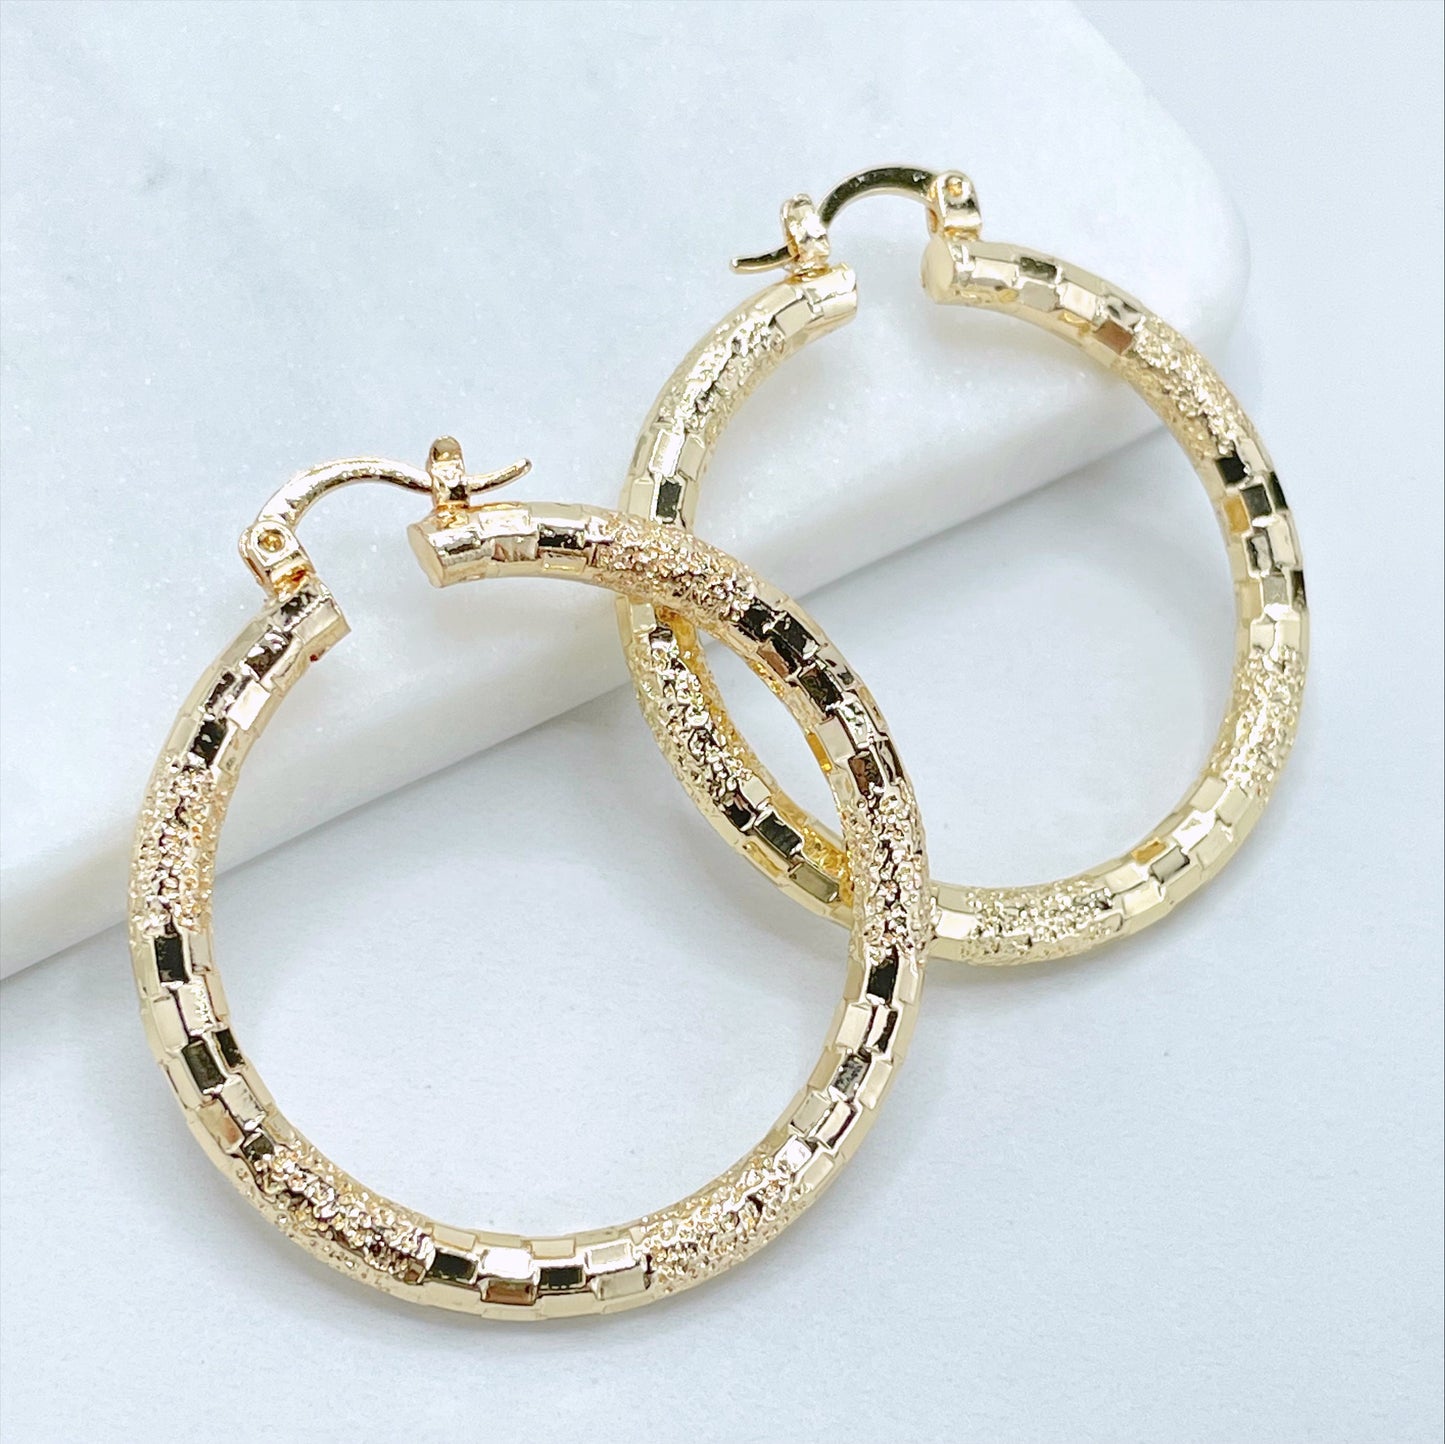 18k Gold Filled 40mm Textured Hoops Earrings, 4mm Thickness, Wholesale Jewelry Making Supplies